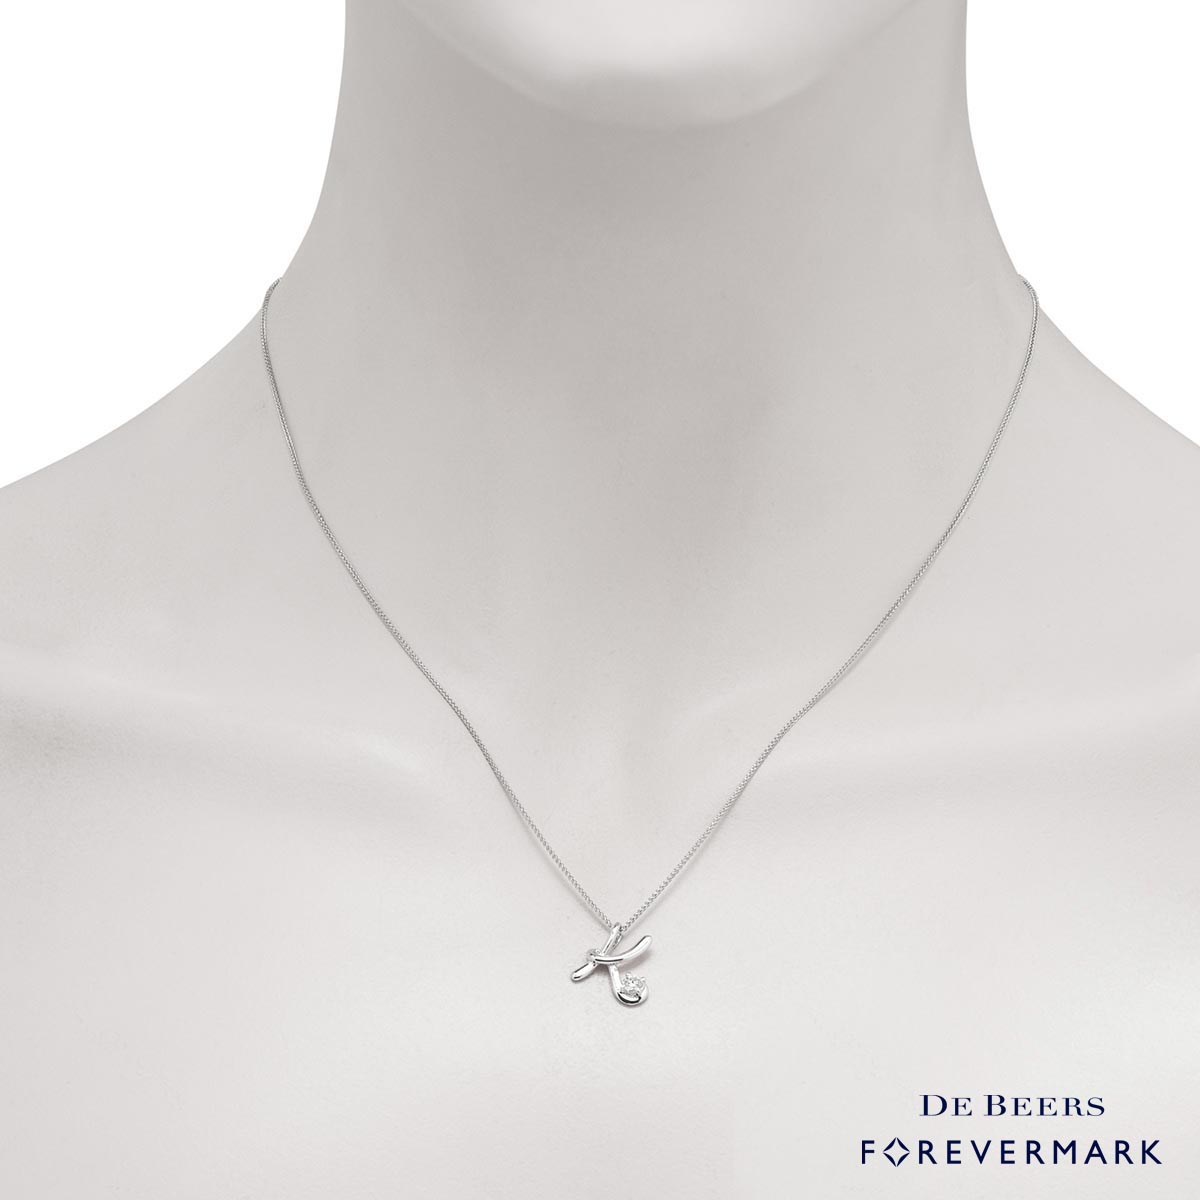 De Beers Forevermark K Initial Diamond Necklace in 18kt White Gold (1/7ct)